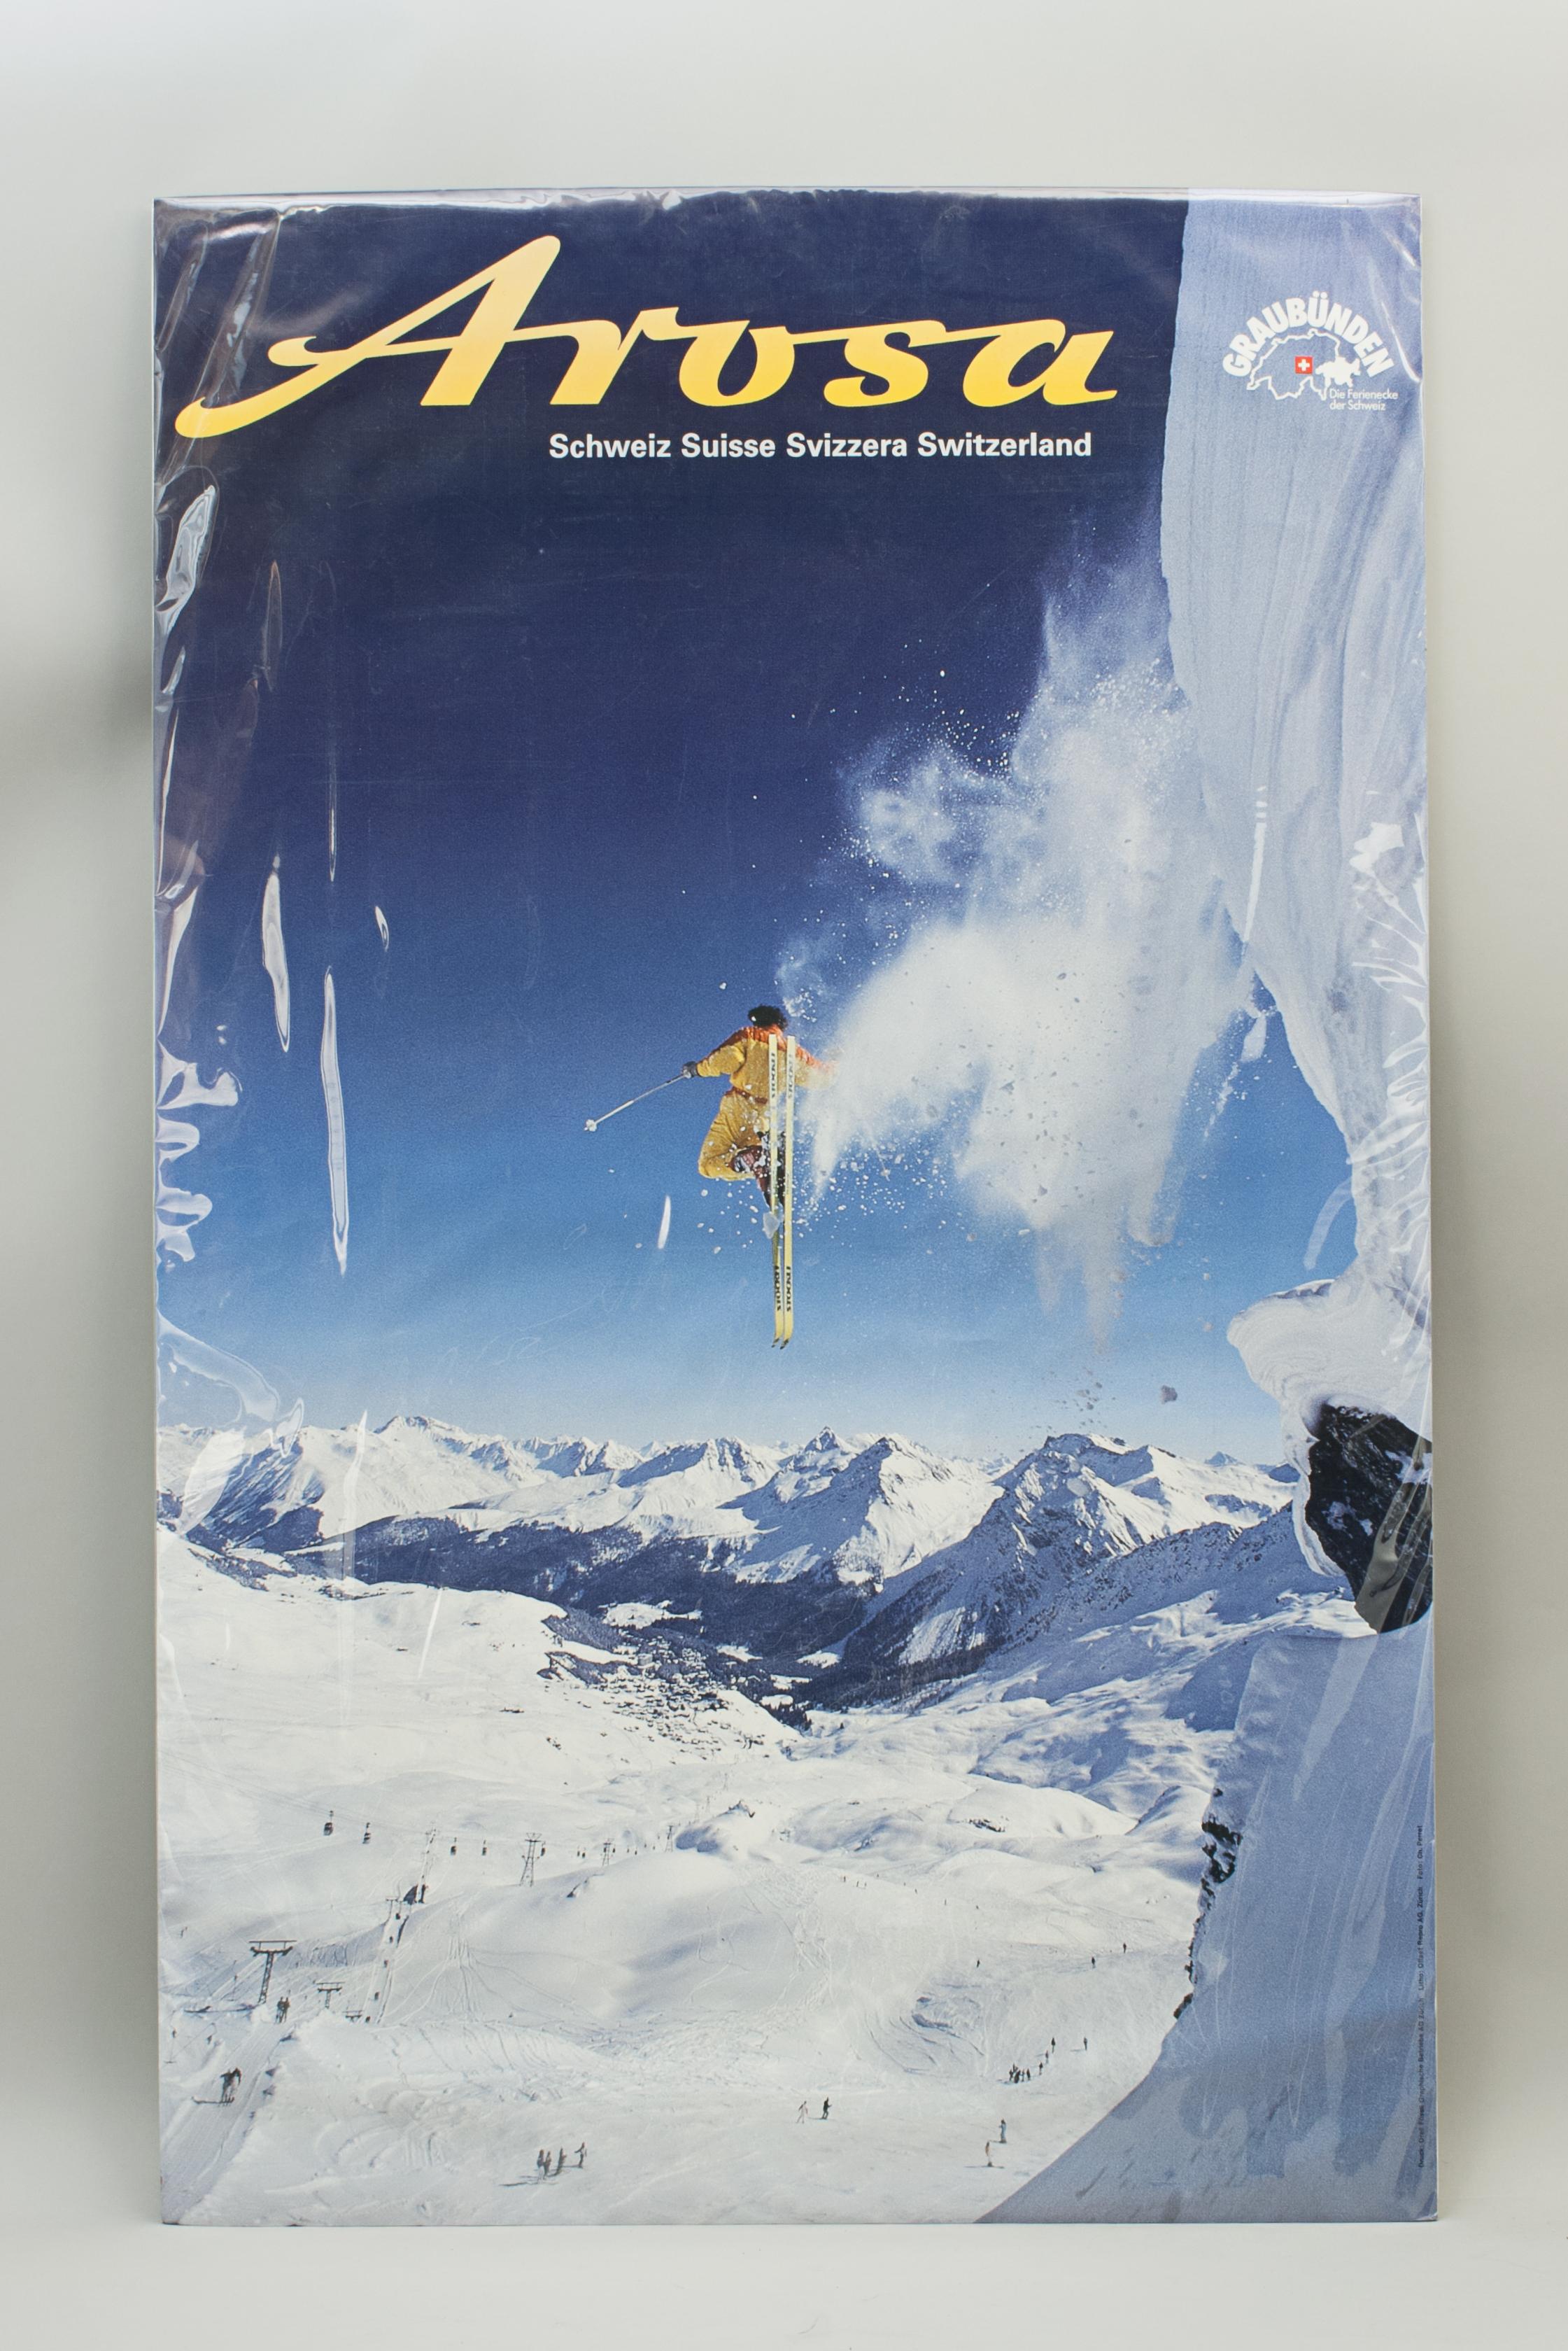 Vintage ski resort poster
A fine ski resort poster entitled in yellow writing across the top 'Arosa'. The photographic poster (color-offset print) is a scenic view of the ski slopes and lifts with a skier in mid air, having just made a jump. Arosa